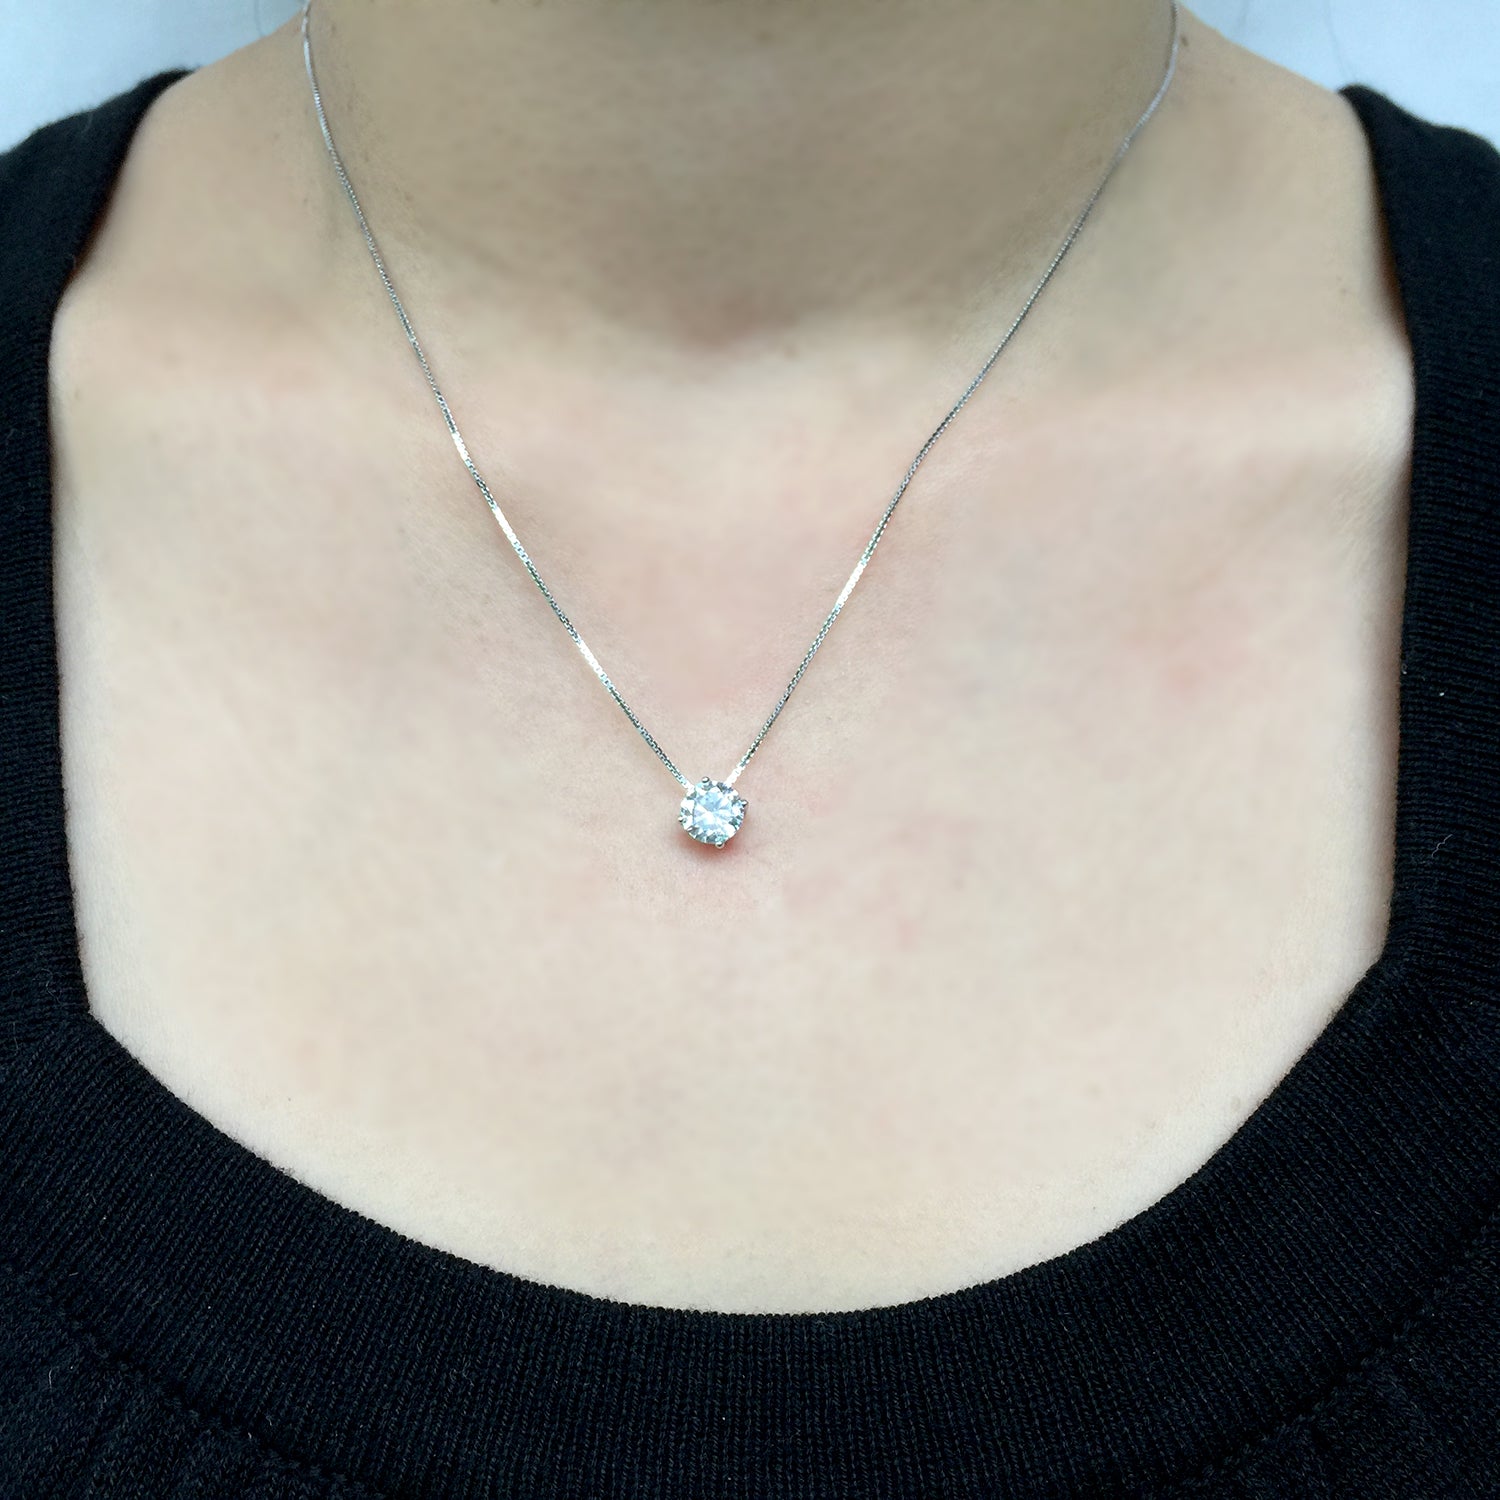 Crystal Necklace Sterling Silver, Tiny Crystal Charm Necklace, Minimalist Jewelry Silver, Gift for Mum